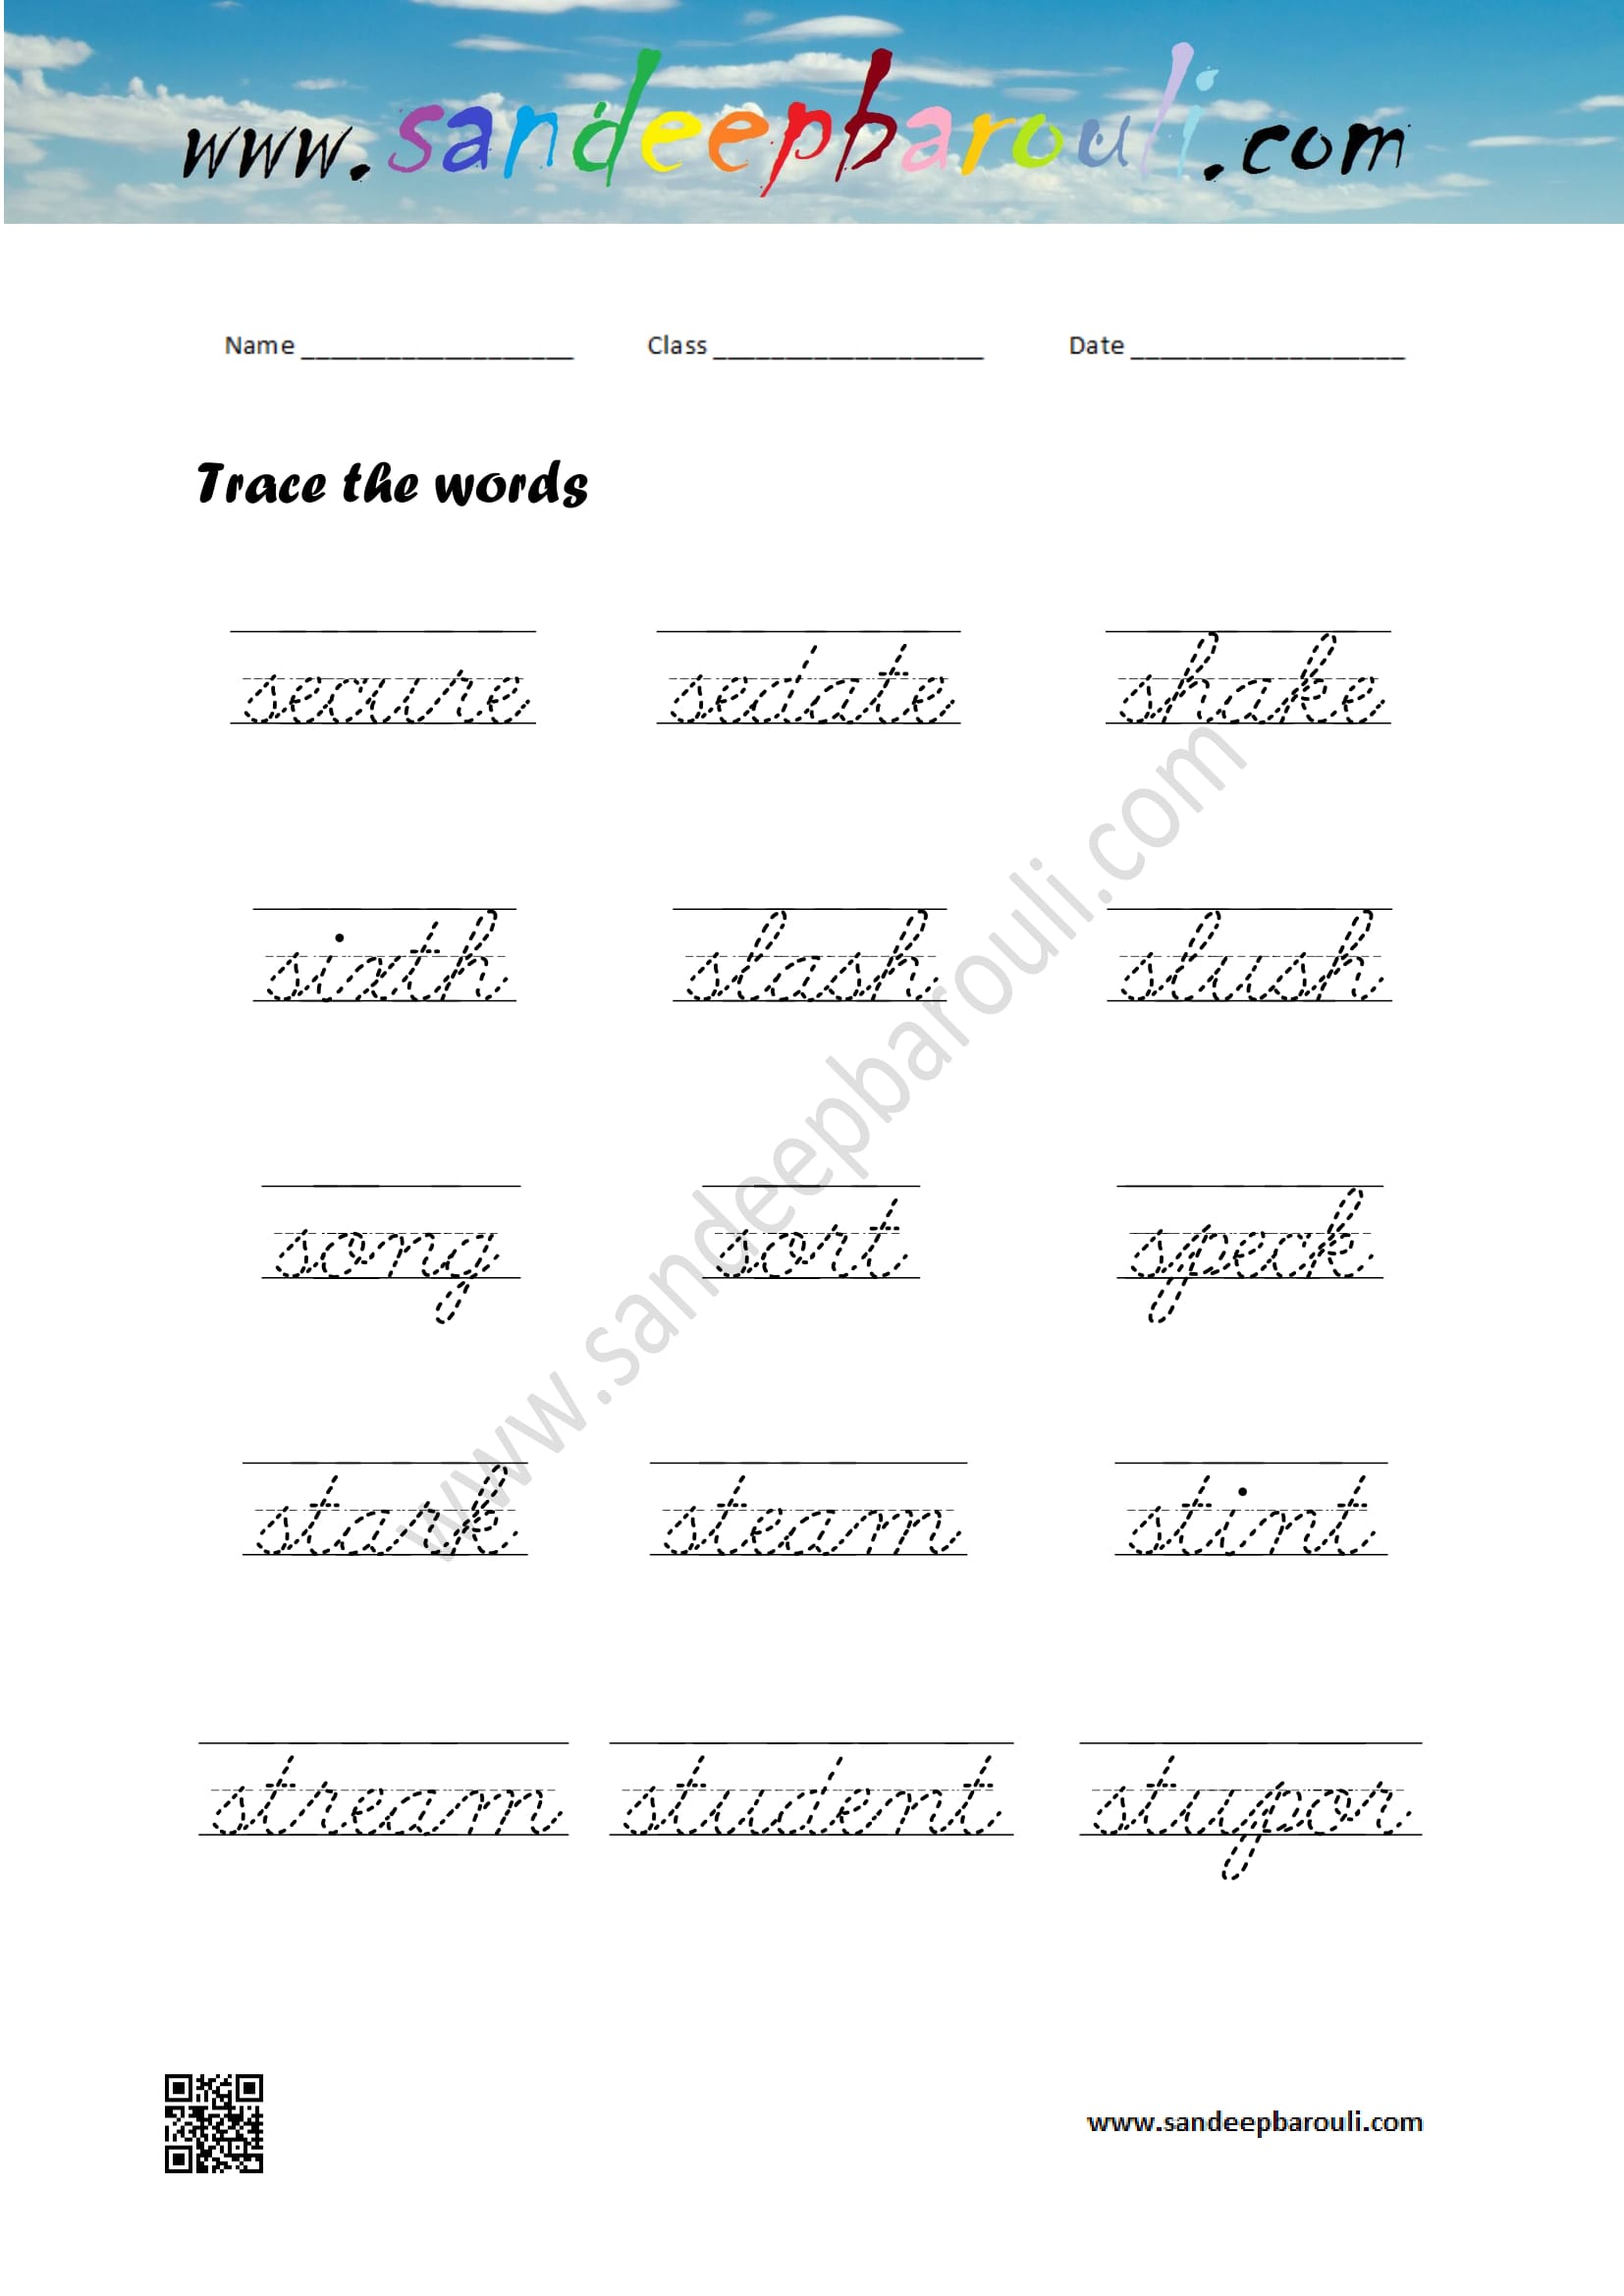 Cursive Writing Worksheet – Trace the words (48)